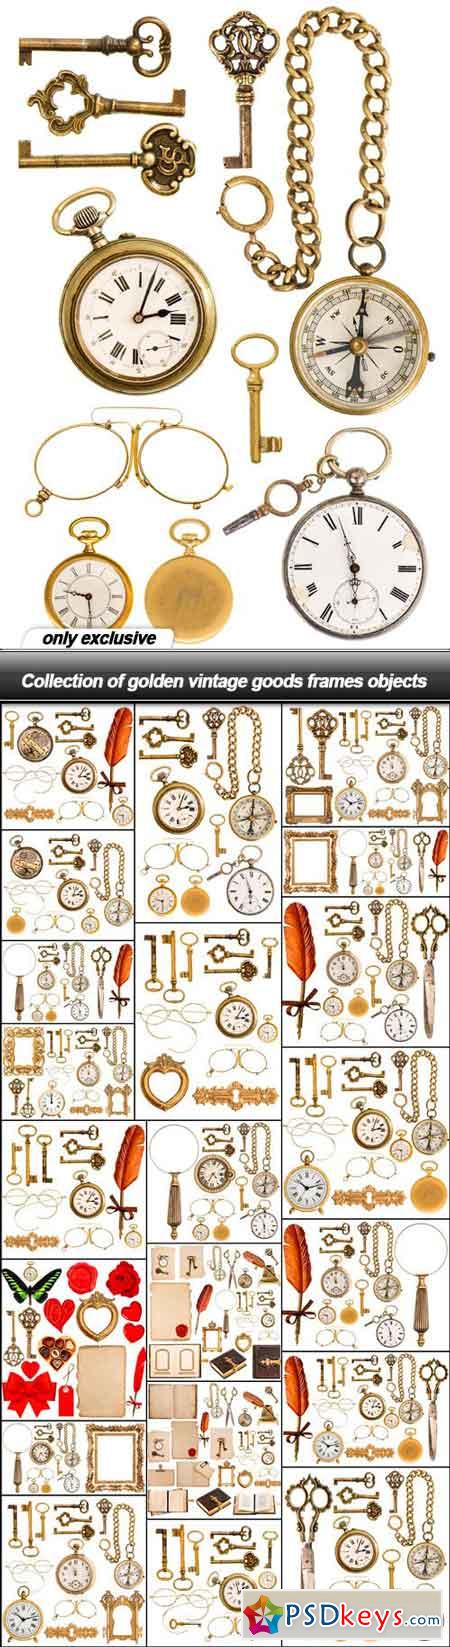 Collection of golden vintage goods frames objects - 21 UHQ JPEG